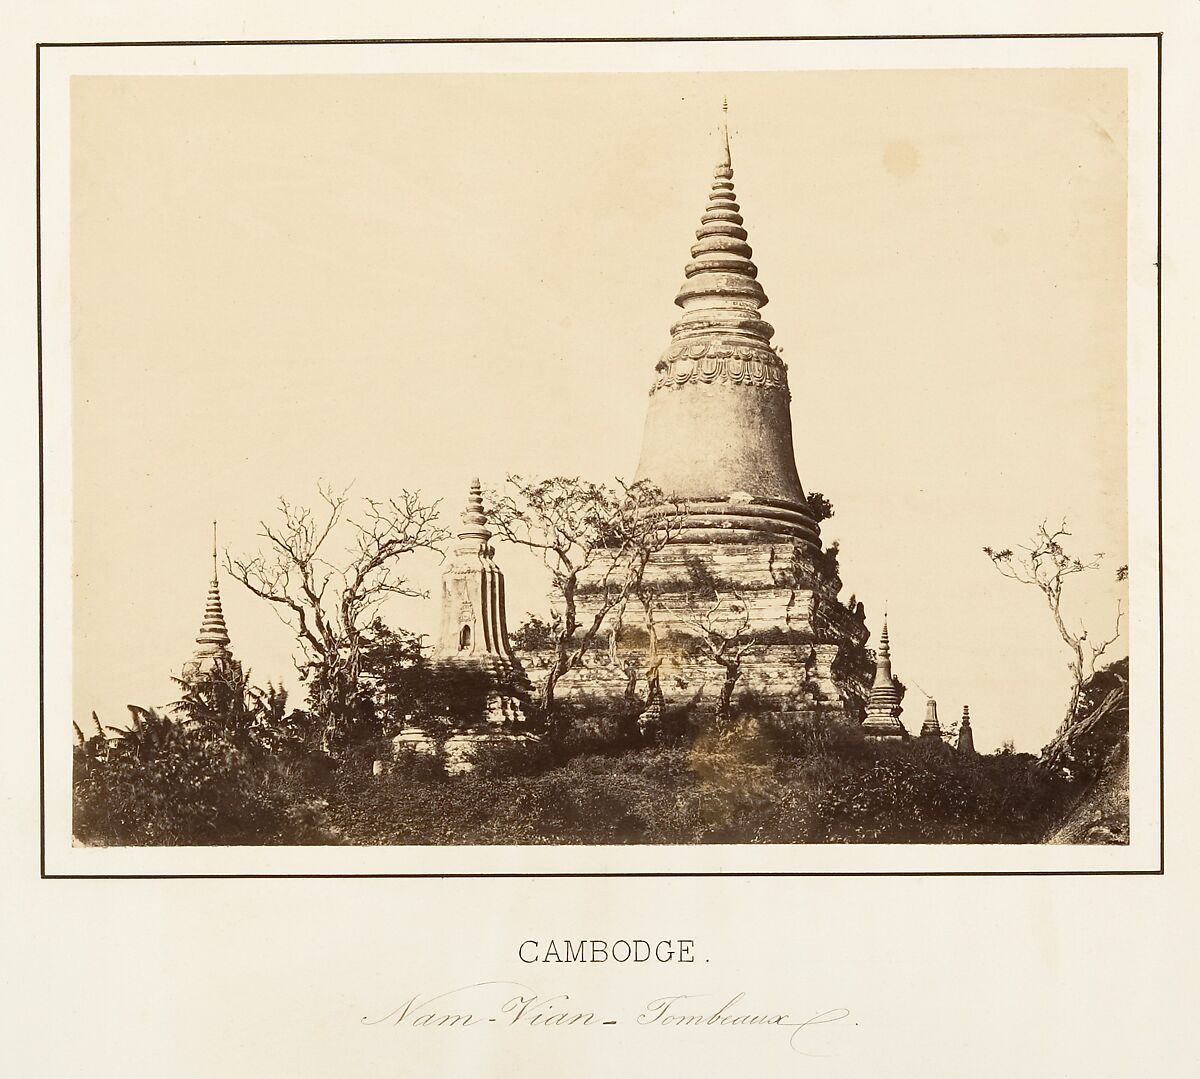 Nam-Vian - Tombeaux, Emile Gsell (French, Sainte-Marie-aux-Mines 1838–1879 Vietnam), Albumen silver prints from glass negatives 